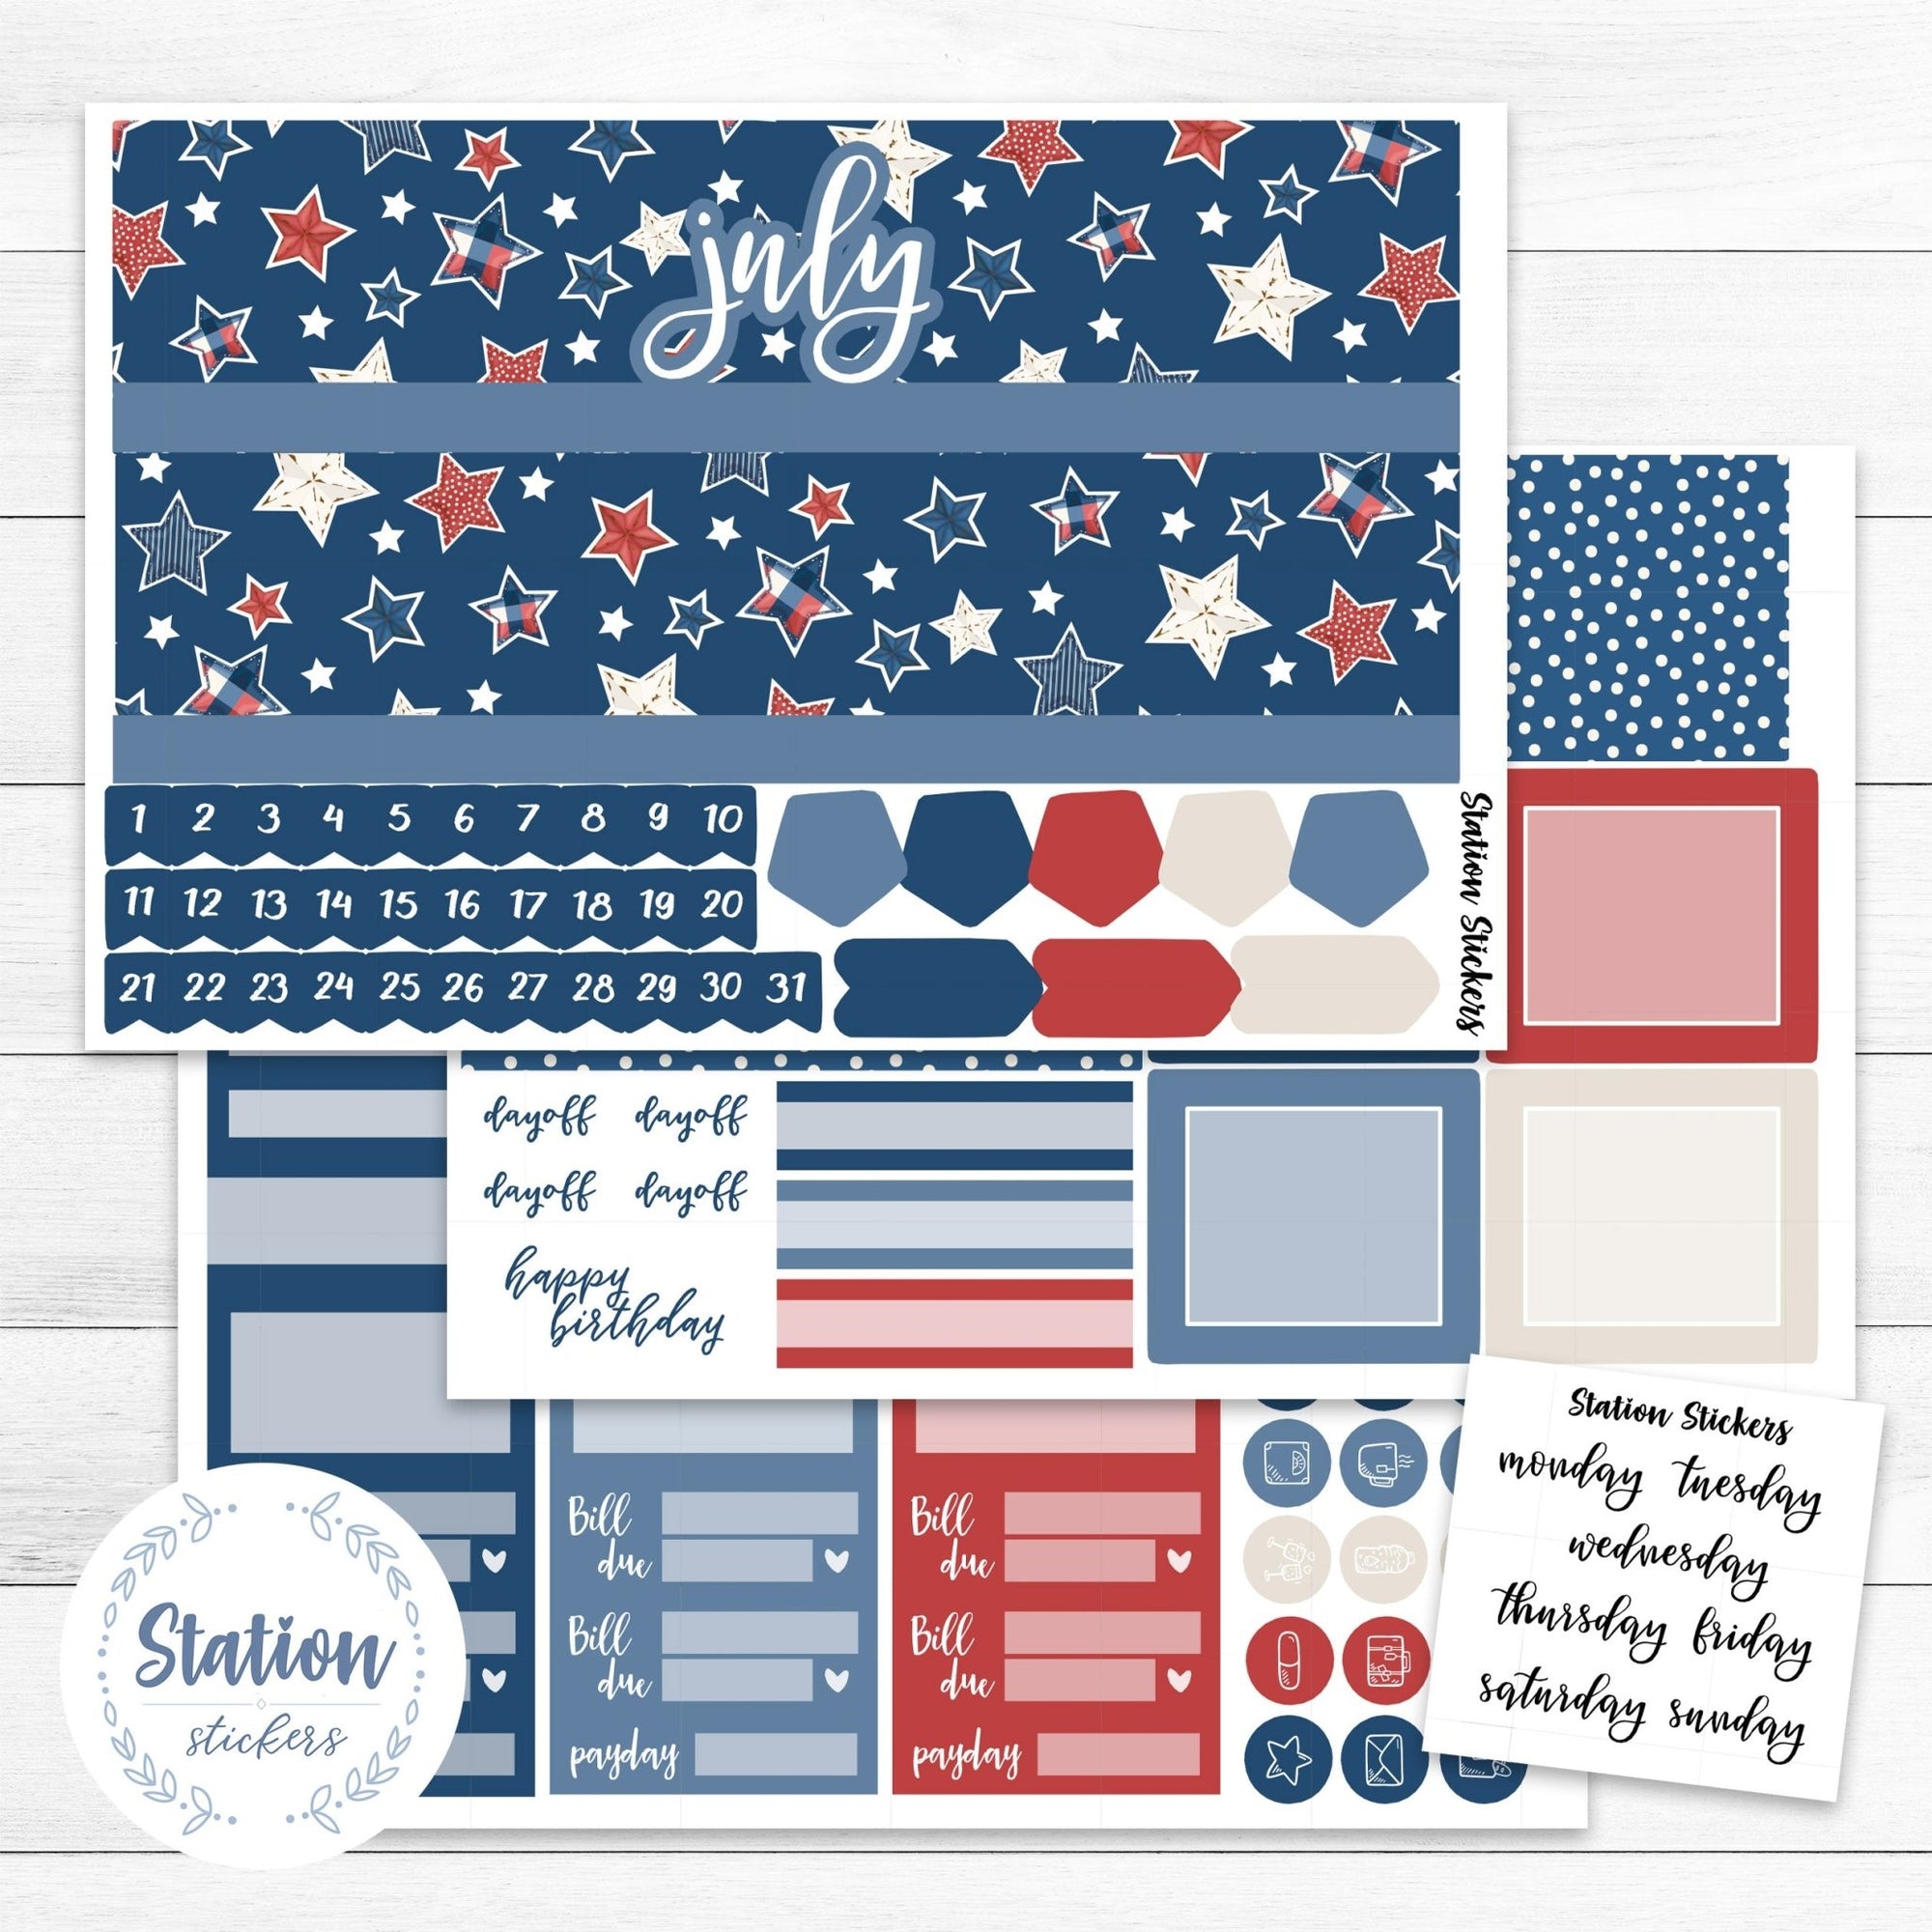 MONTHLY STANDARD 1.6" • STARS - Station Stickers